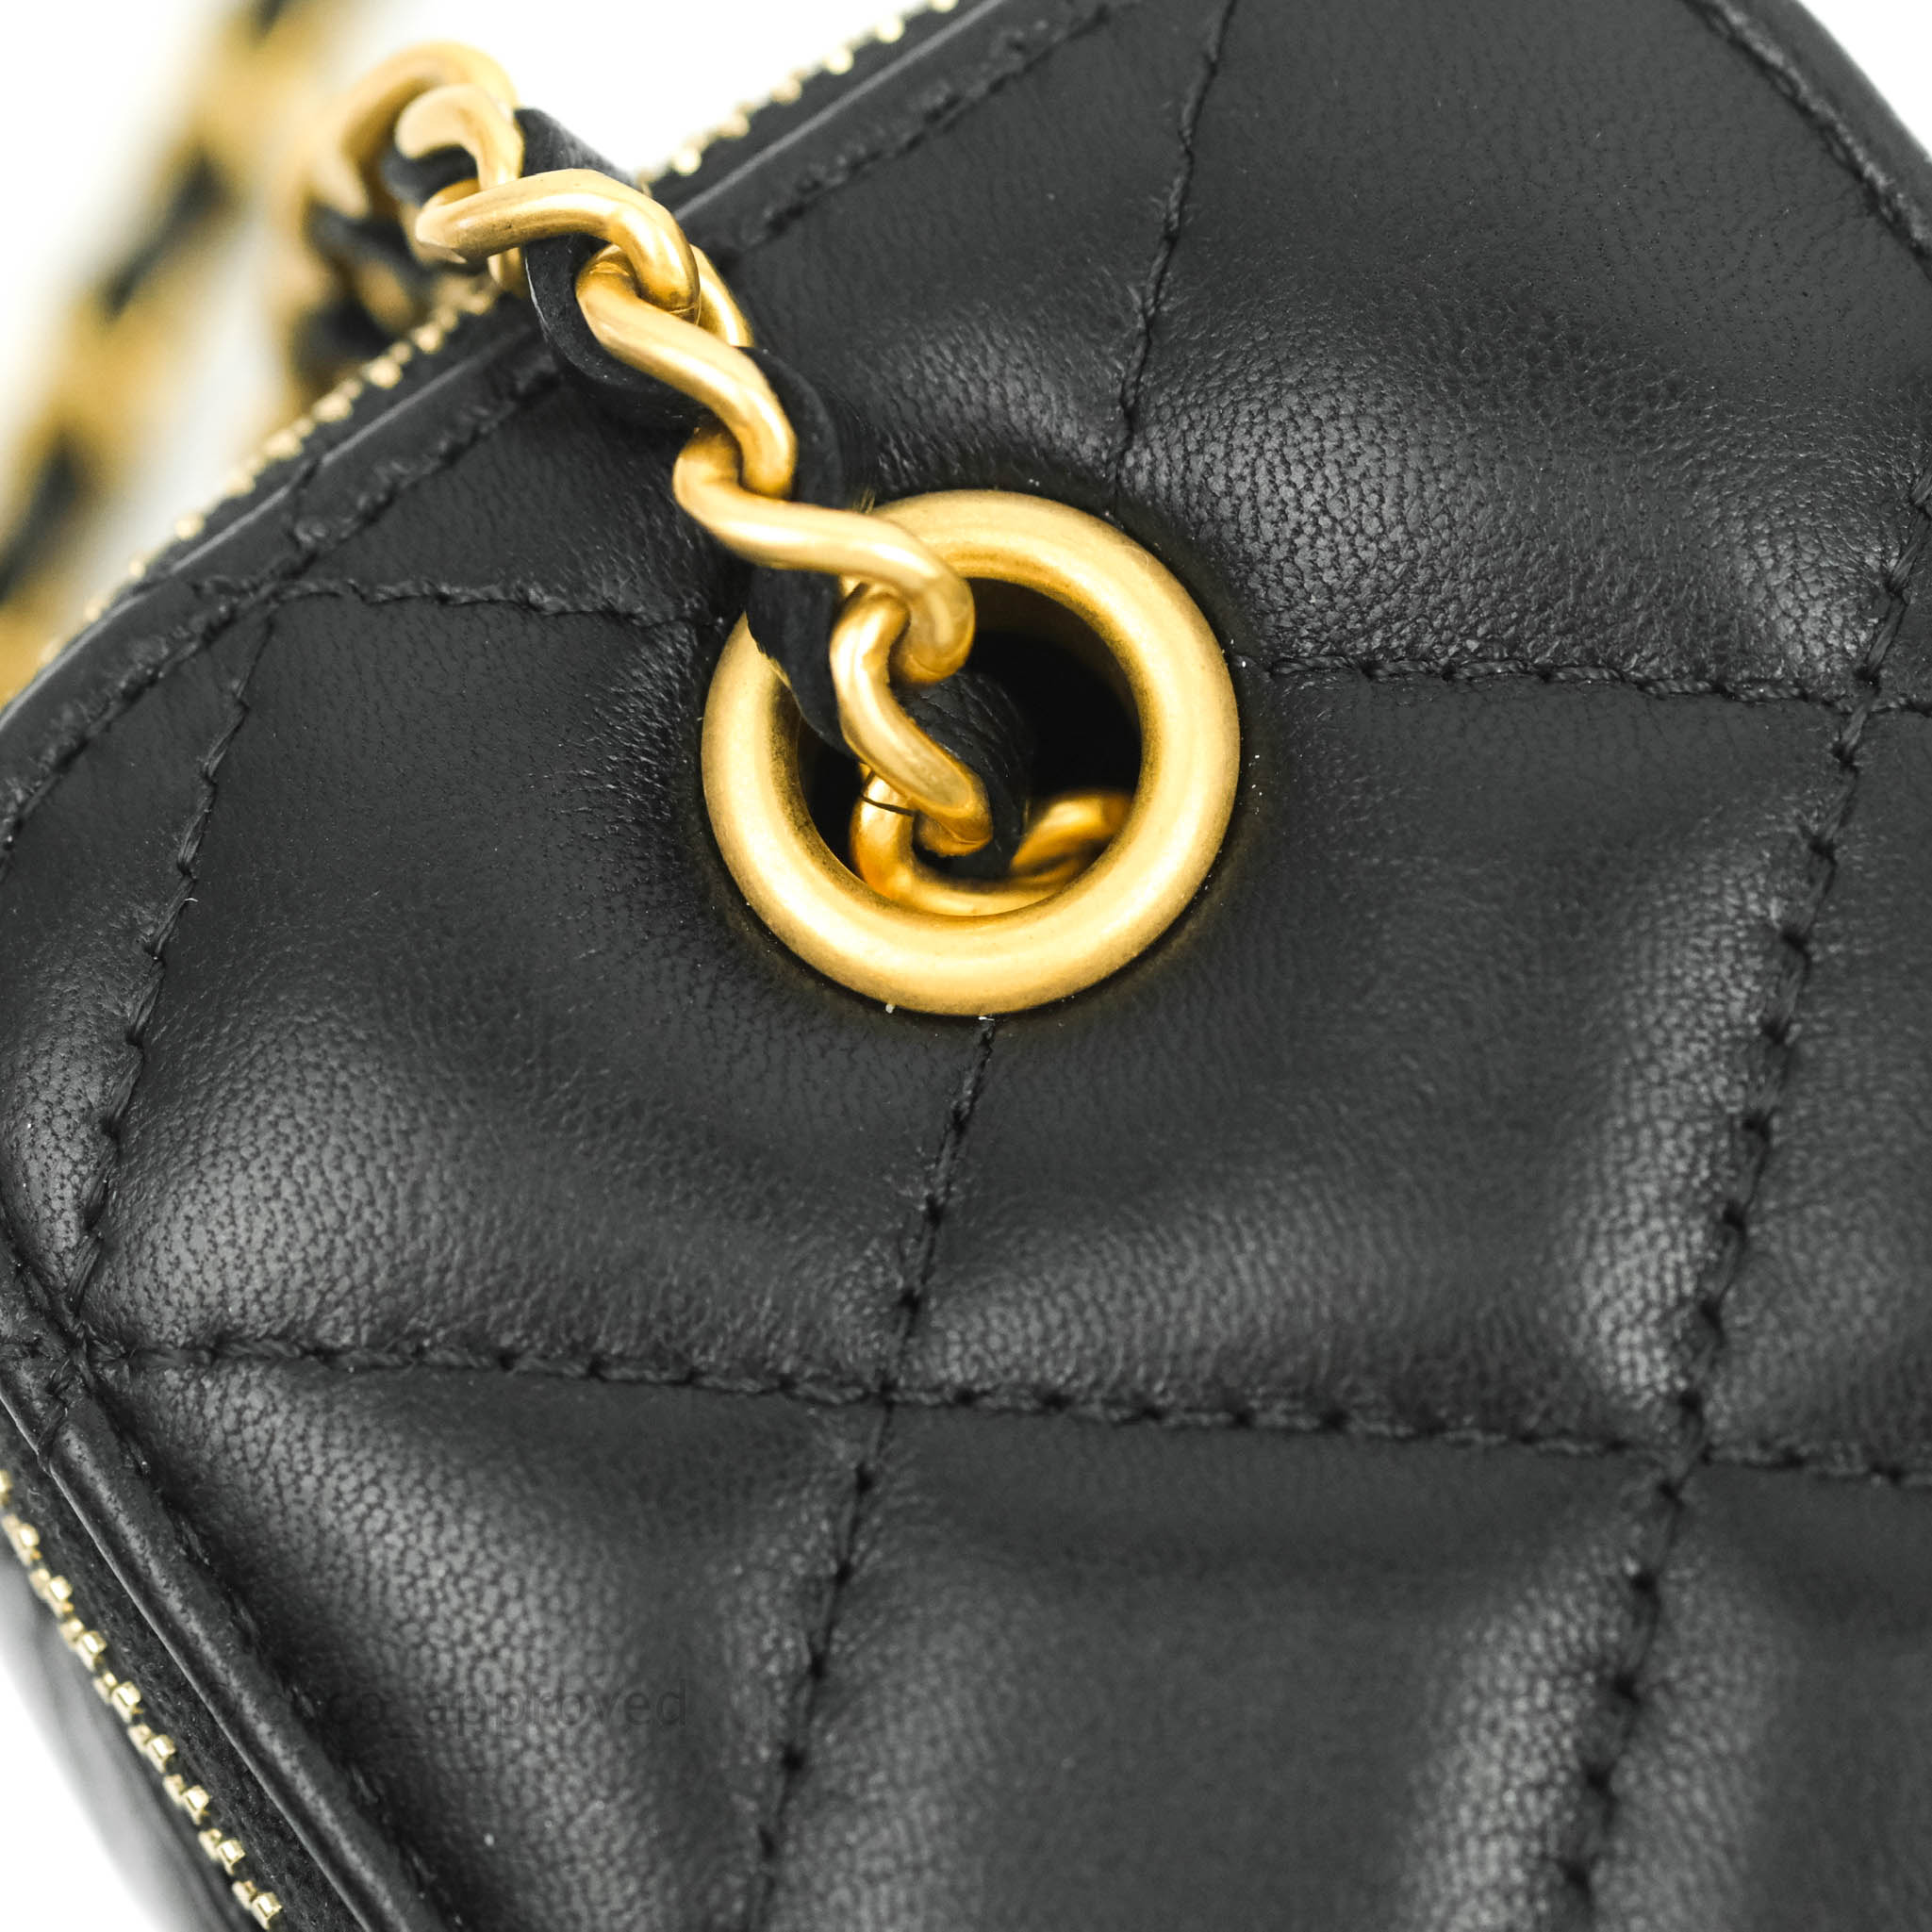 Lambskin & Gold-Tone Metal Black Small Classic Box with Chain, CHANEL